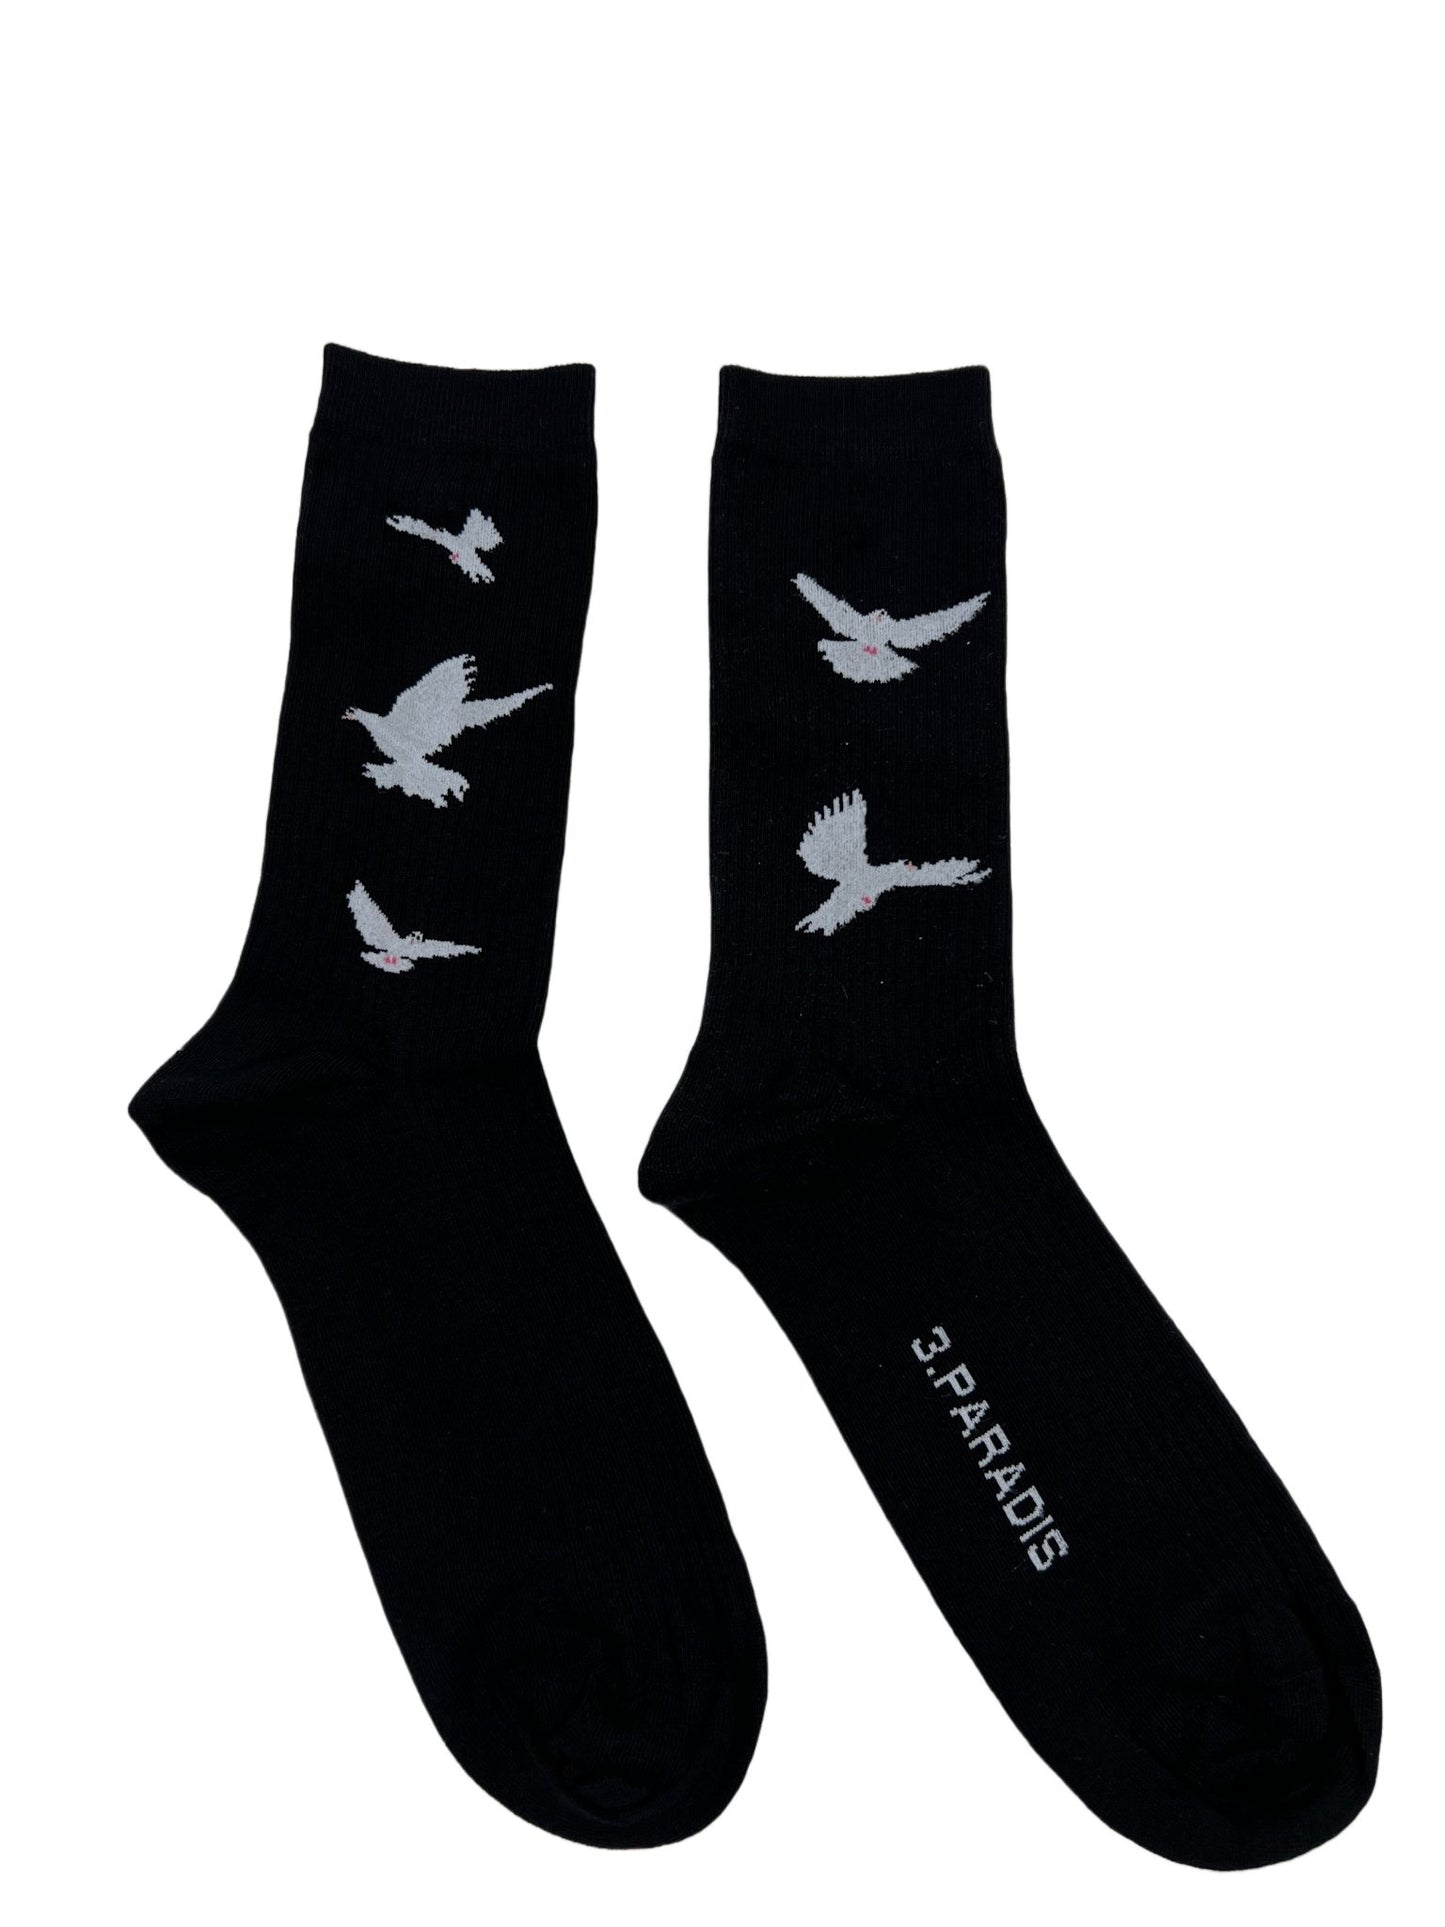 A pair of black socks with 3.PARADIS FREEDOM DOVES on them.